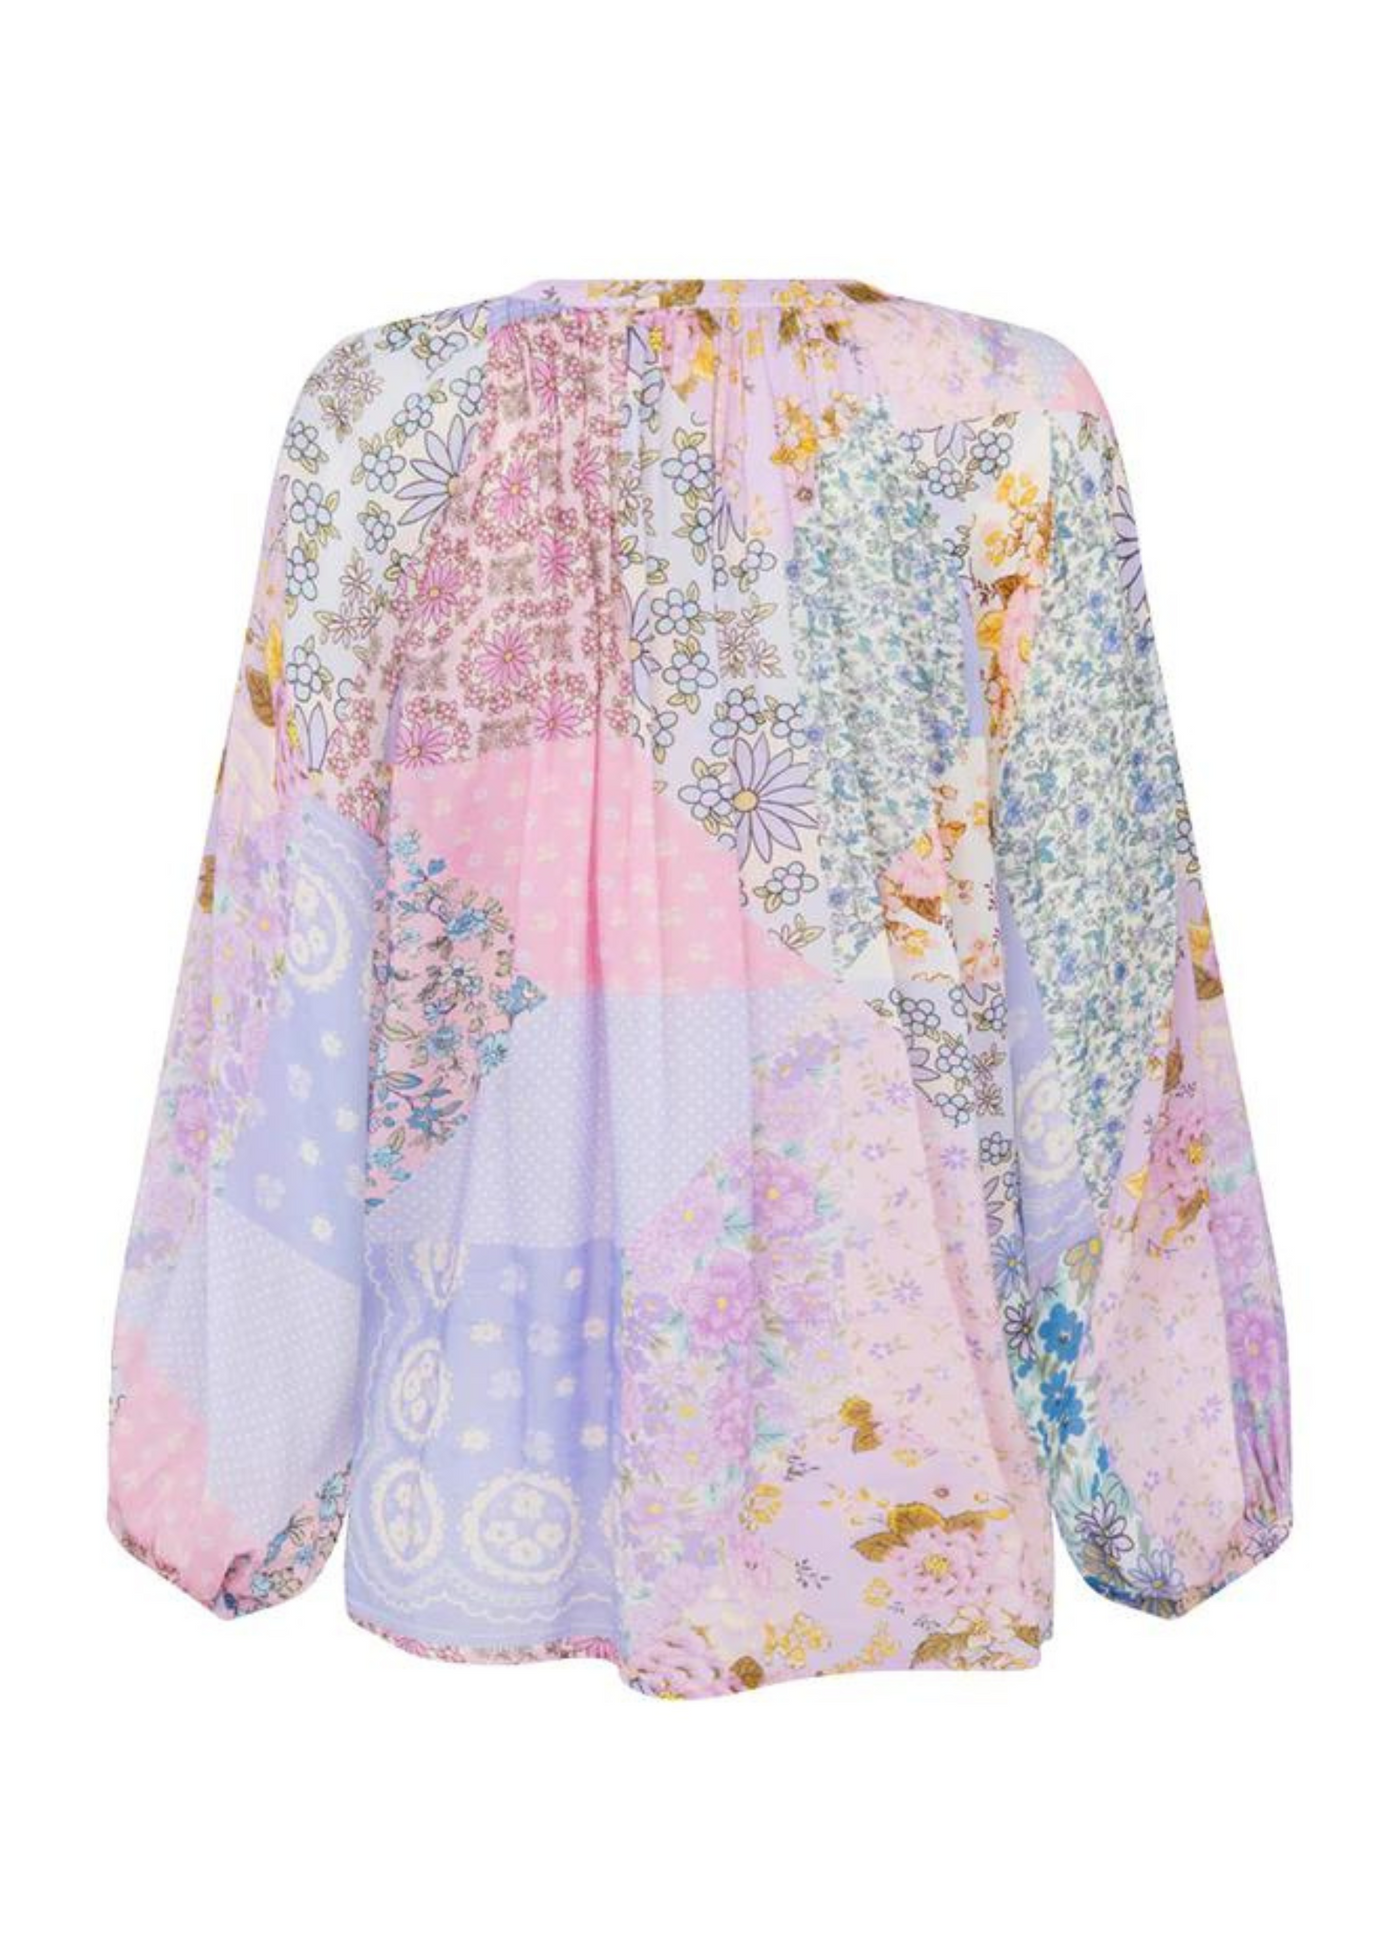 Model wearing the Spell Cha Cha Blouse in Pastel patchwork jacaranda print